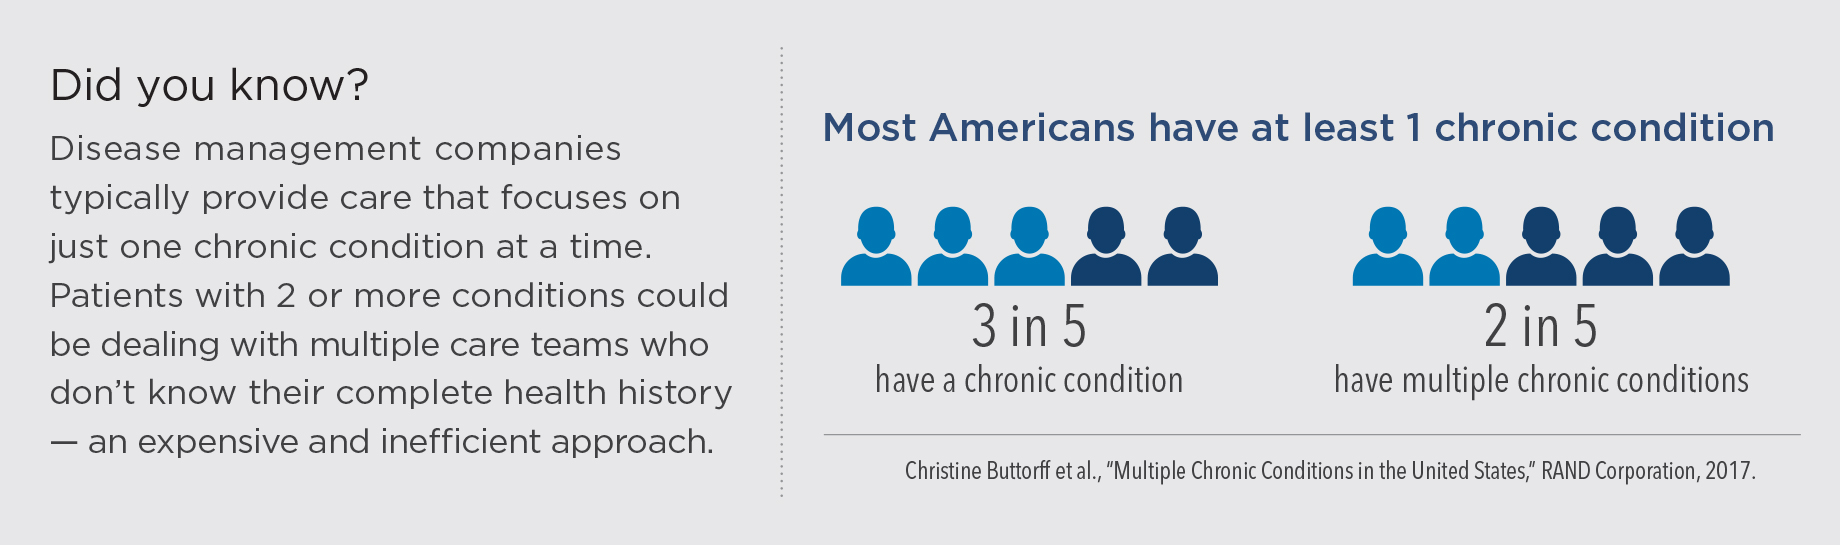 Did you know? Most Americans have at least 1 chronic condition. 3 in 5 Americans have a chronic condition, and 2 in 5 have multiple chronic conditions. Disease management companies typically provide care that focuses on just one chronic condition at a time. Patients with 2 or more conditions could be dealing with multiple care teams who don’t know their complete health history – an expensive and inefficient approach.